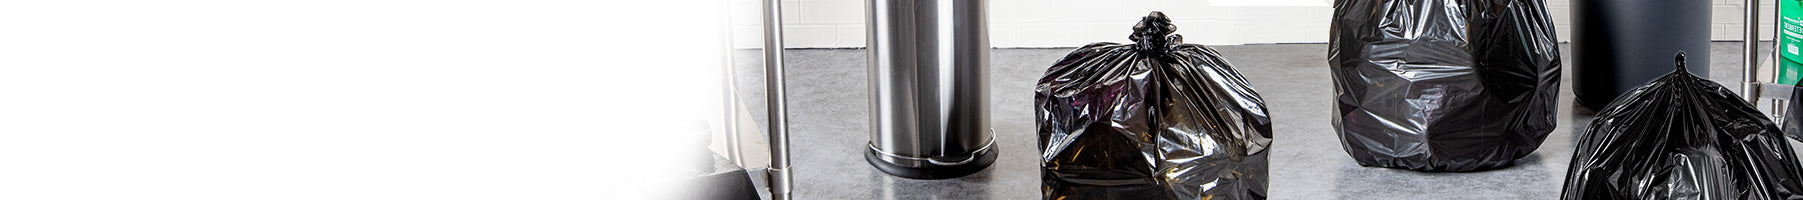 Banner_Janitorial_Trash-Can-Liners_116